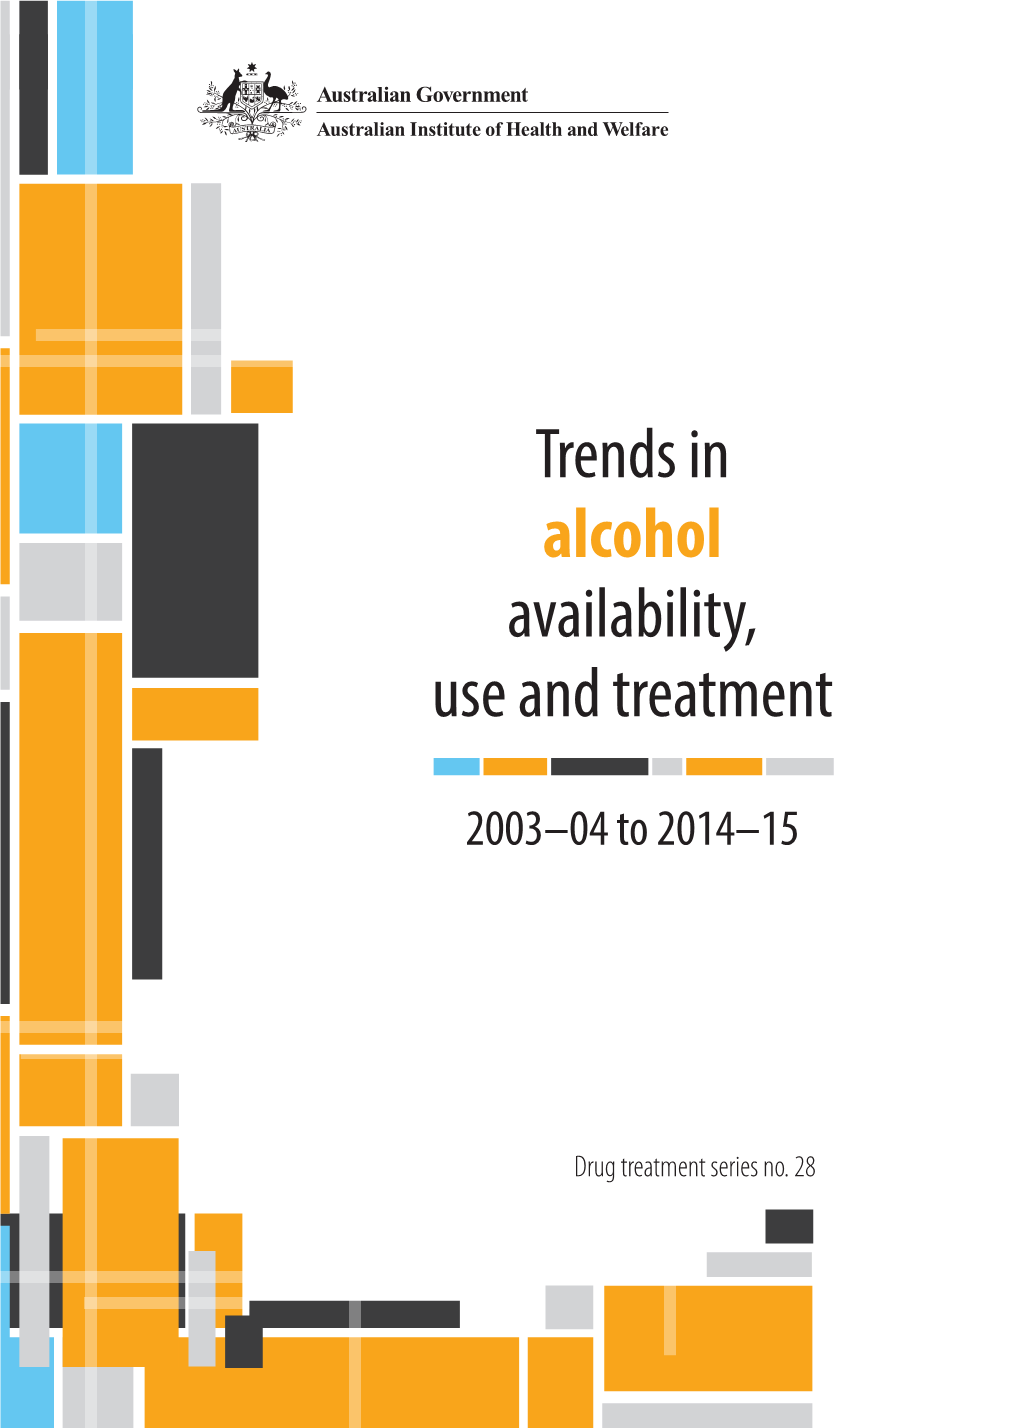 Trends in Alcohol Availability, Use and Treatment 2003–04 to 2014–15